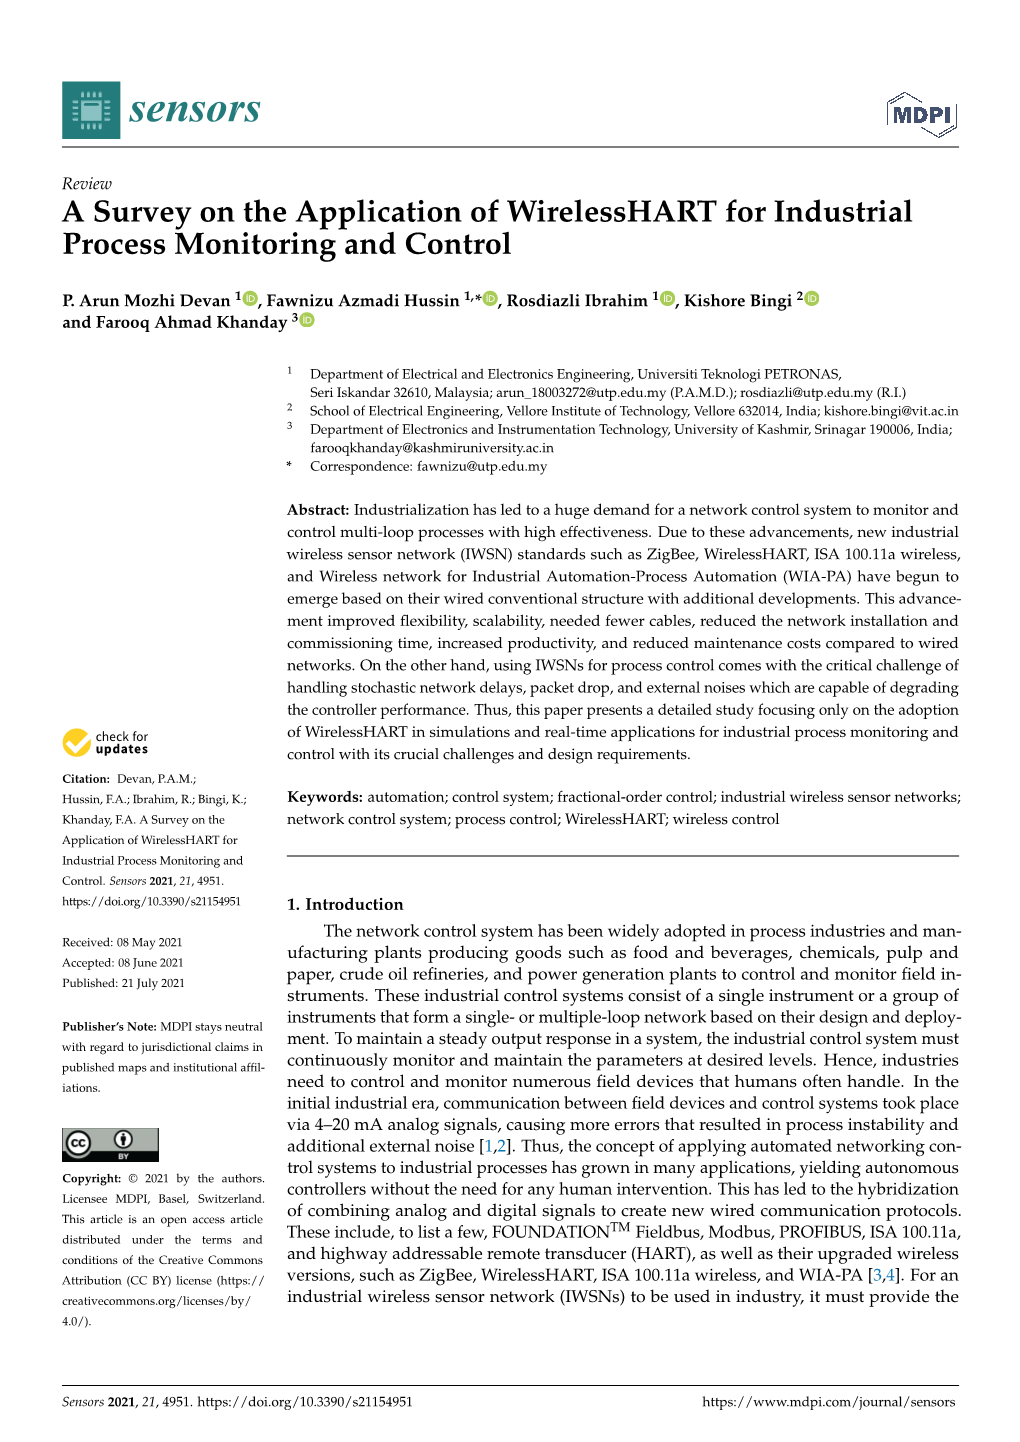 A Survey on the Application of Wirelesshart for Industrial Process Monitoring and Control